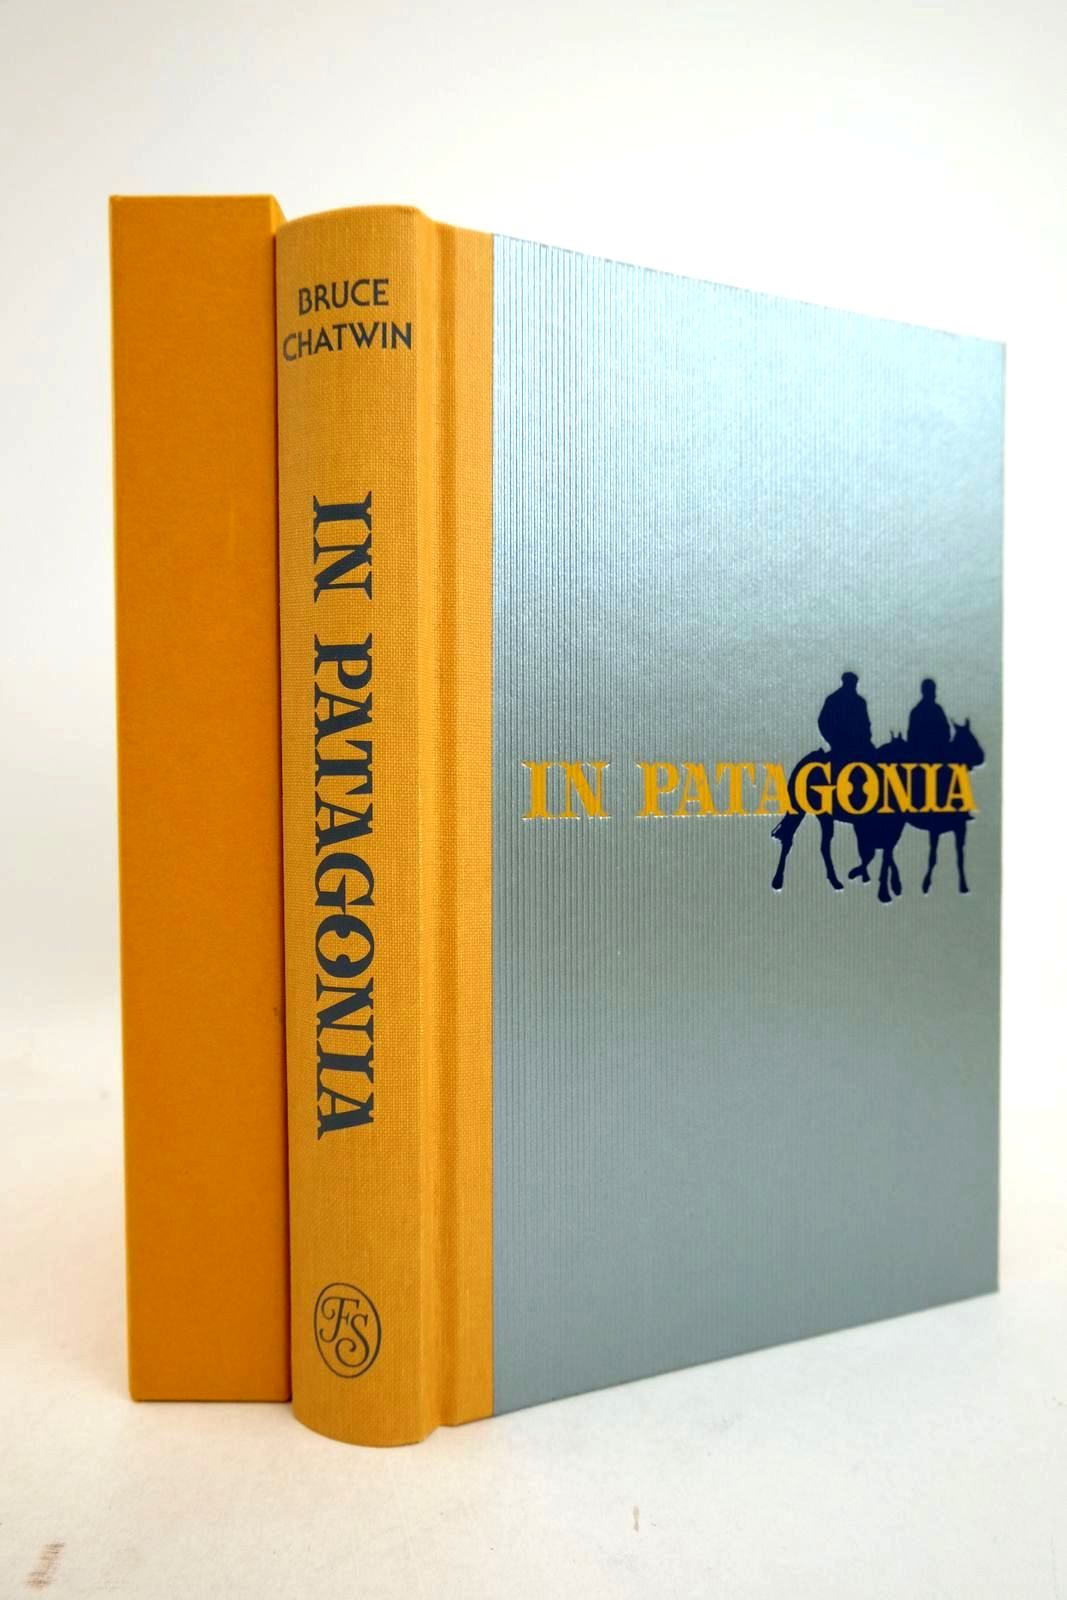 Photo of IN PATAGONIA written by Chatwin, Bruce
Dalrymple, William published by Folio Society (STOCK CODE: 2134410)  for sale by Stella & Rose's Books